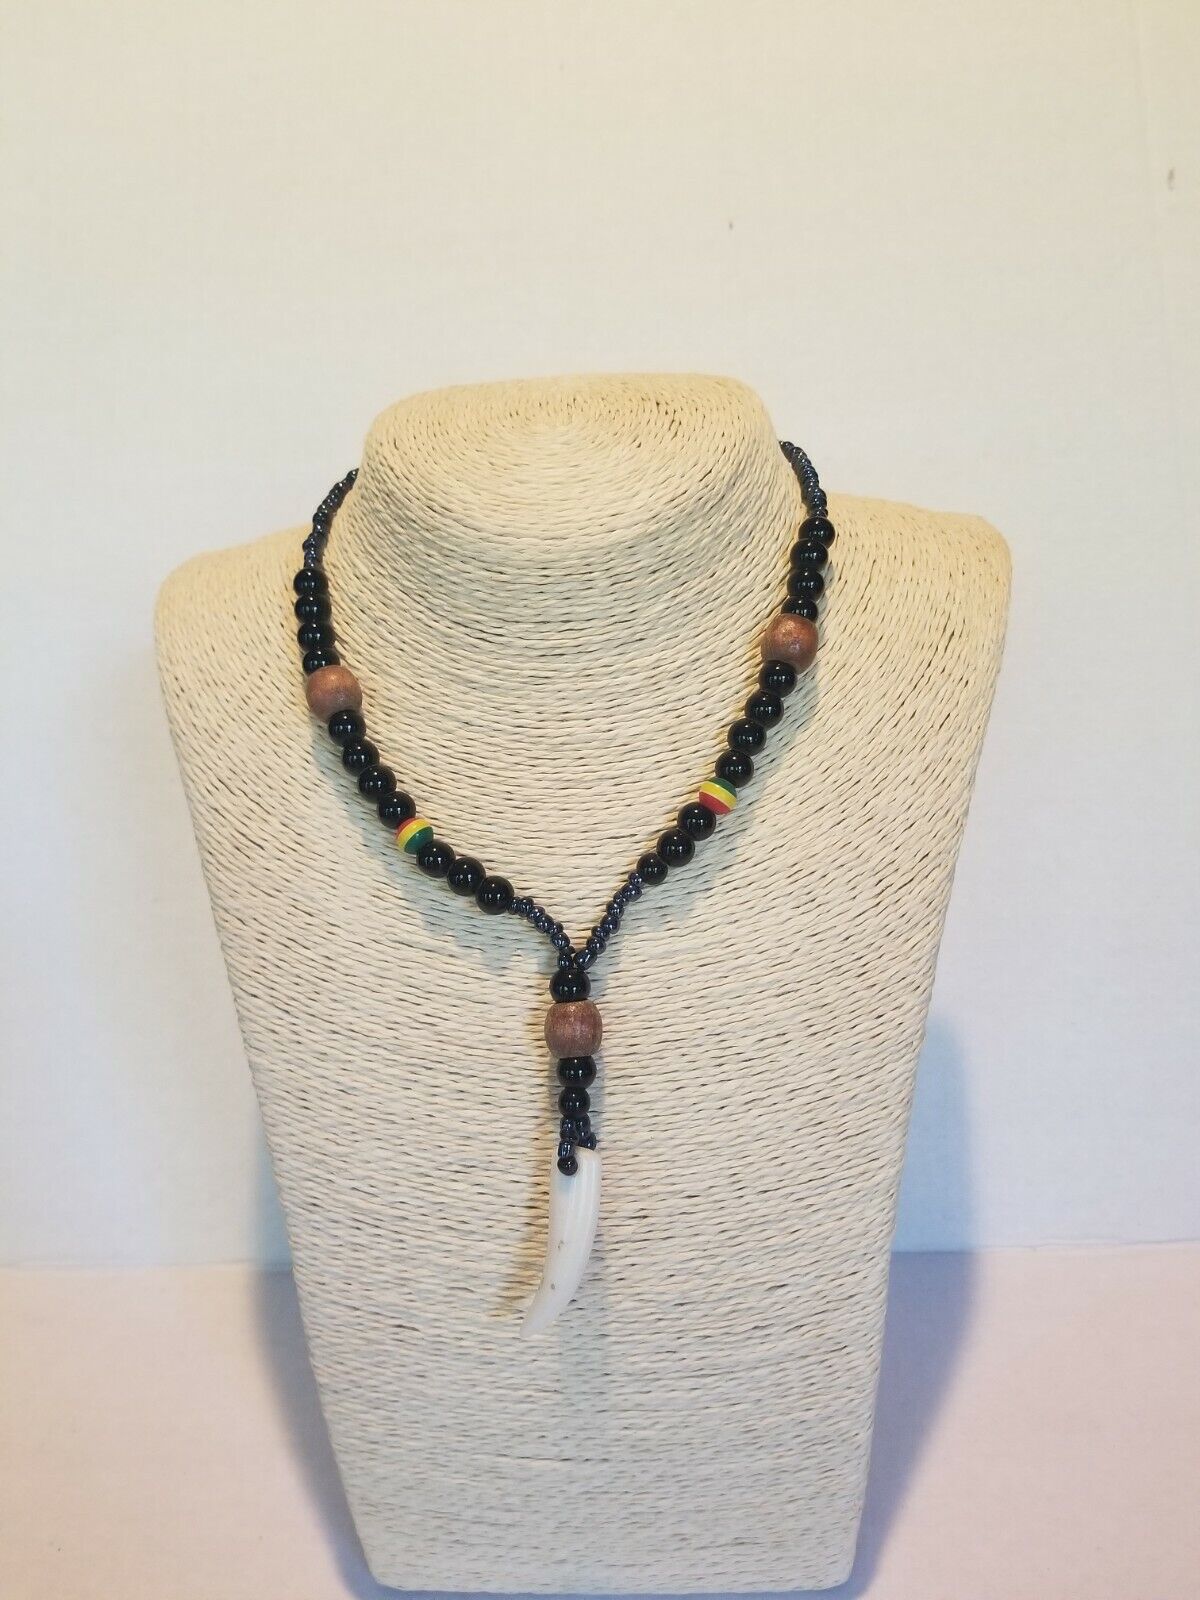 Authentic Ethnic African Bead Necklace Jewelry with Bone from Mali West Africa Без бренда